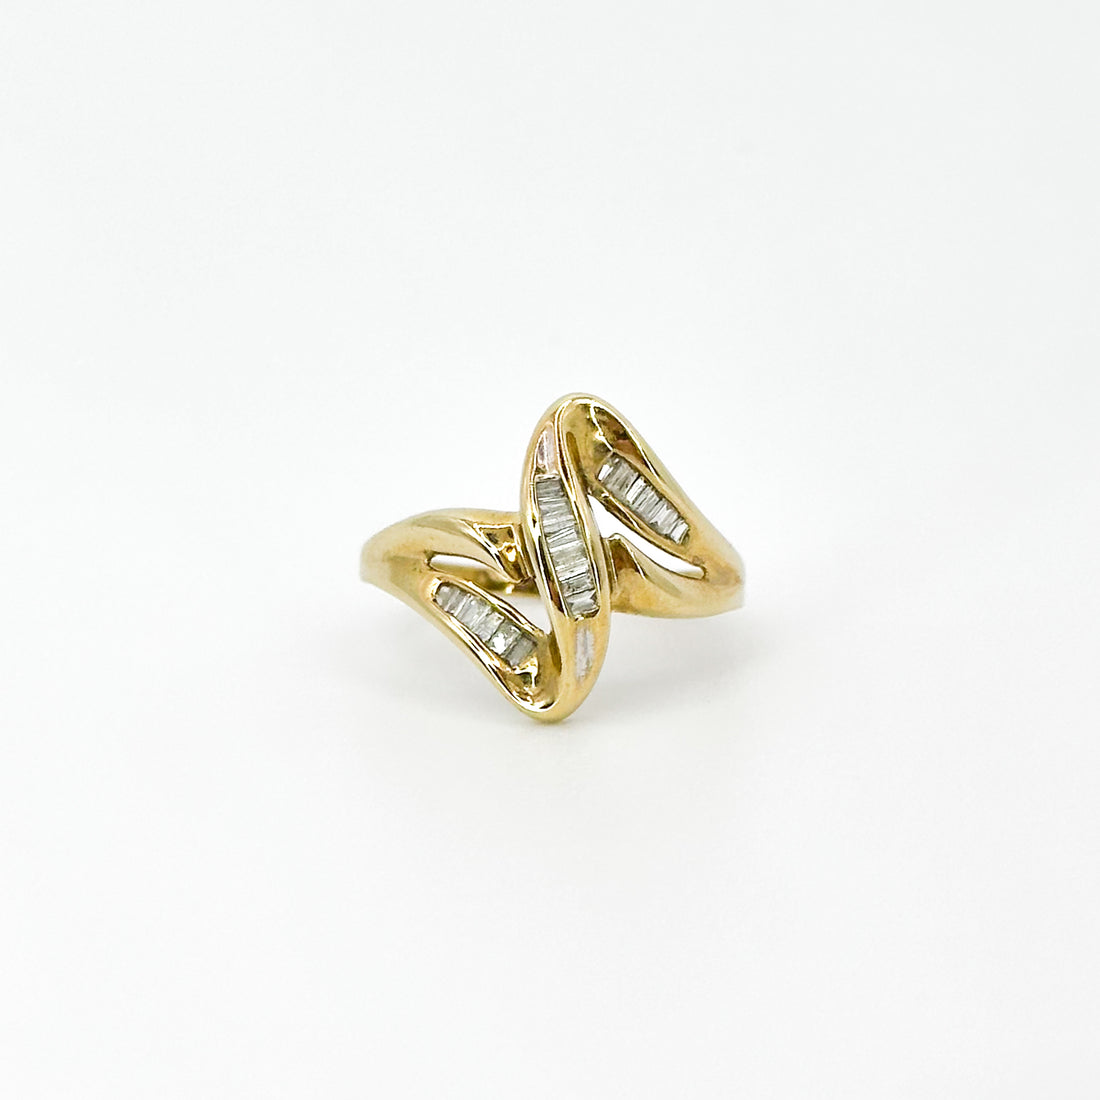 Vintage Gold Ring With Diamonds